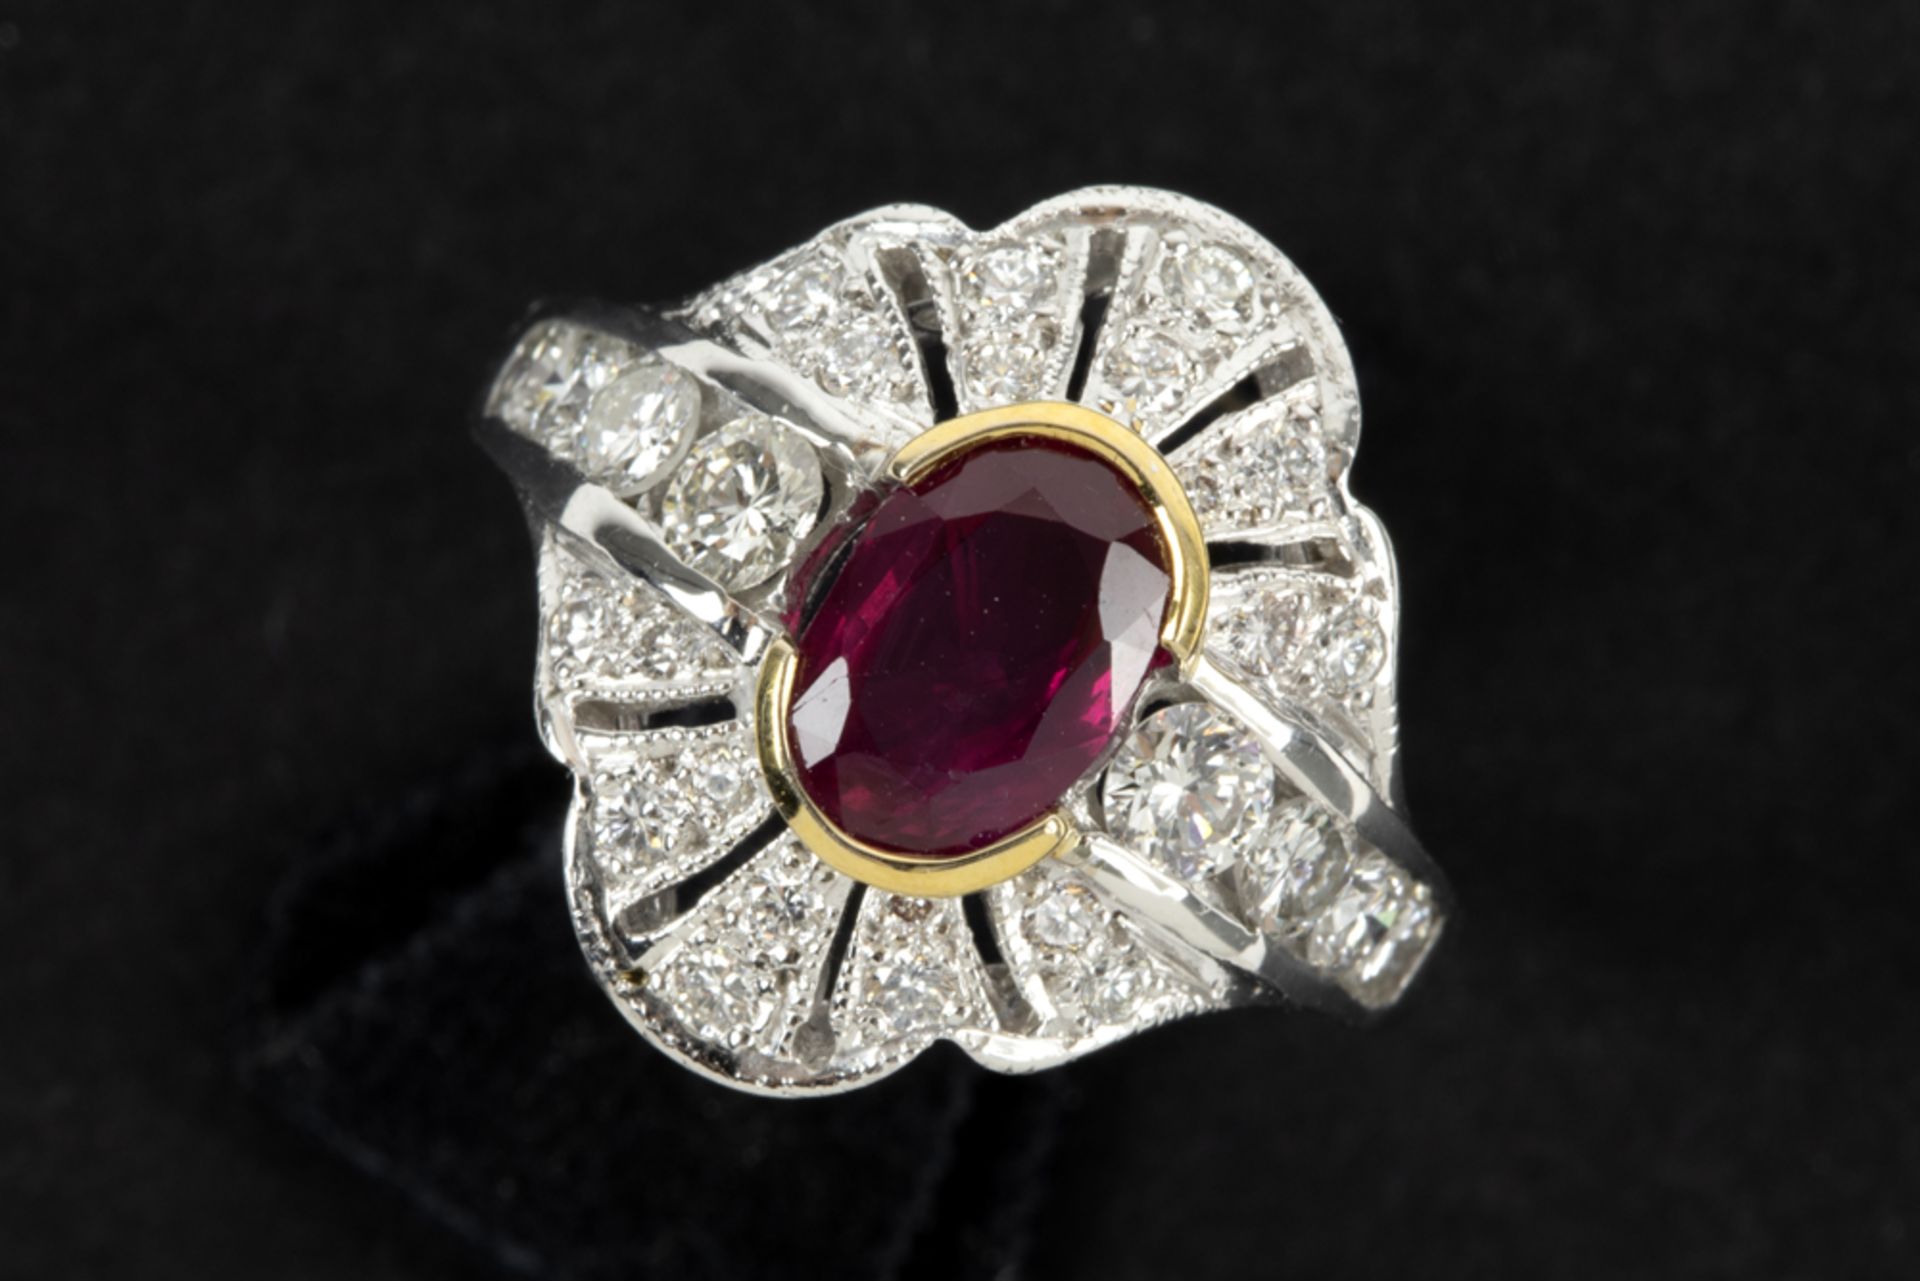 oval cut not-heated (!!) pigeon blood ruby of 1,76 carat set in yellow gold (18 carat) on a ring in 